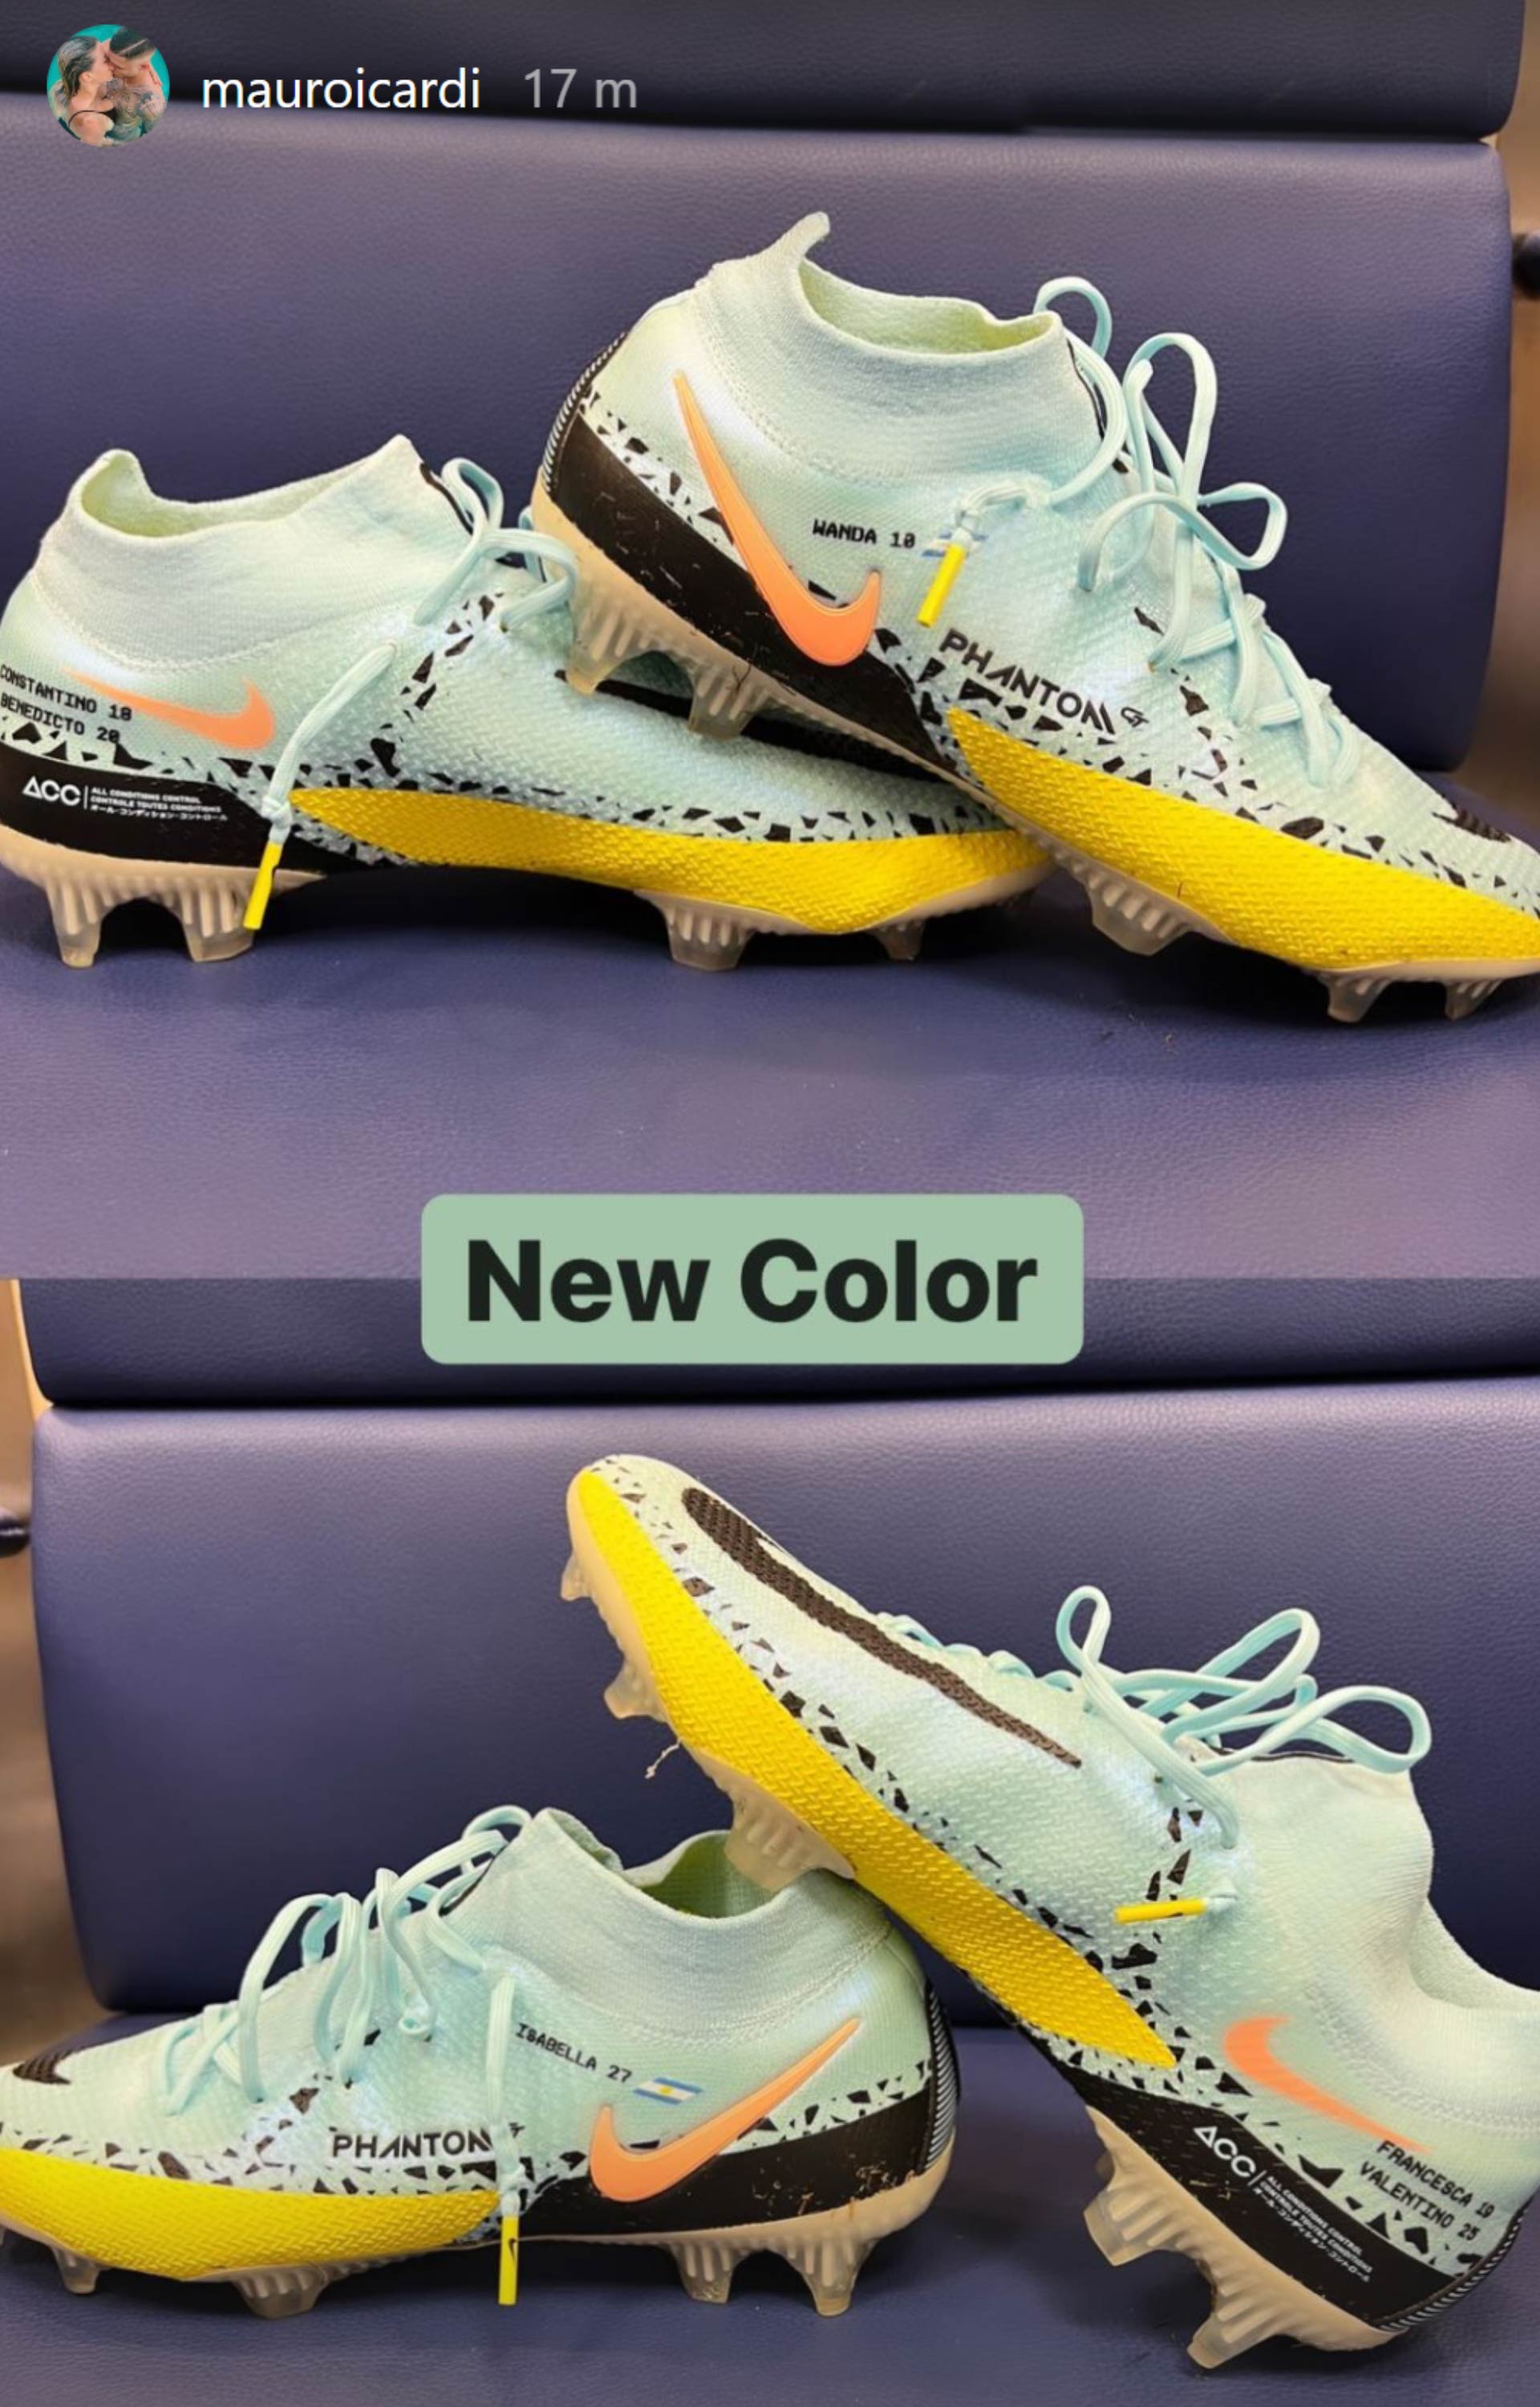 Icardi's new ankle boots with a detail: they have Wanda's name on the side